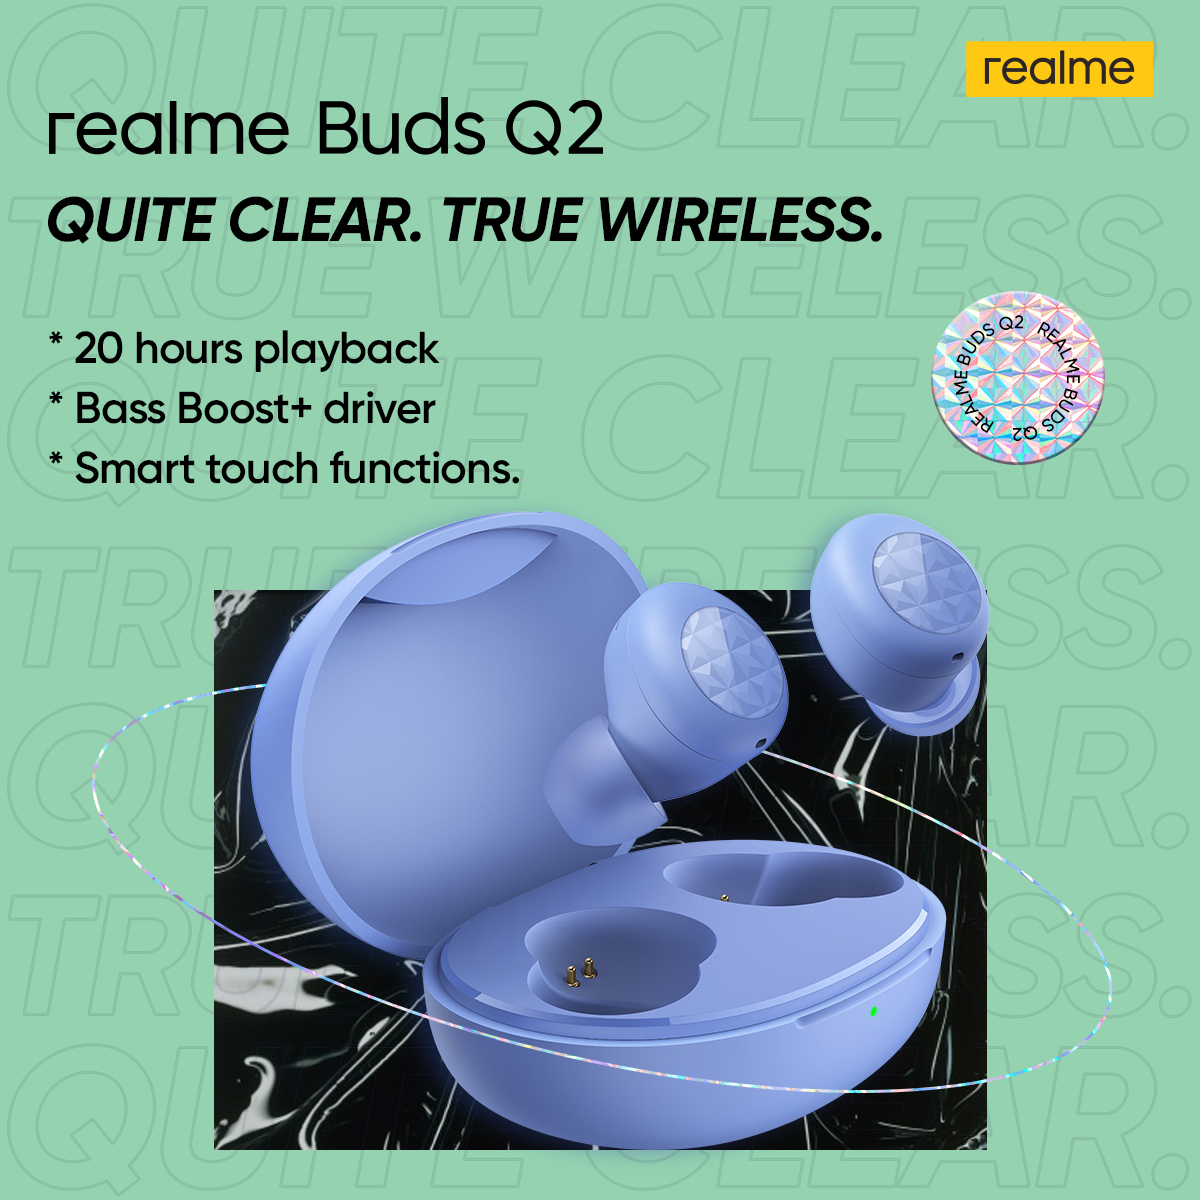 #realmeBudsQ2 comes with upgraded and amazing features to upgrade your smart life. It's packed with:
✅ 20-hours of Total Playback Time
✅ 10mm Bass Boost Driver
✅ 88ms Super Low Latency and much more.
Available all over Pakistan at an amazing price of Rs.5,999.